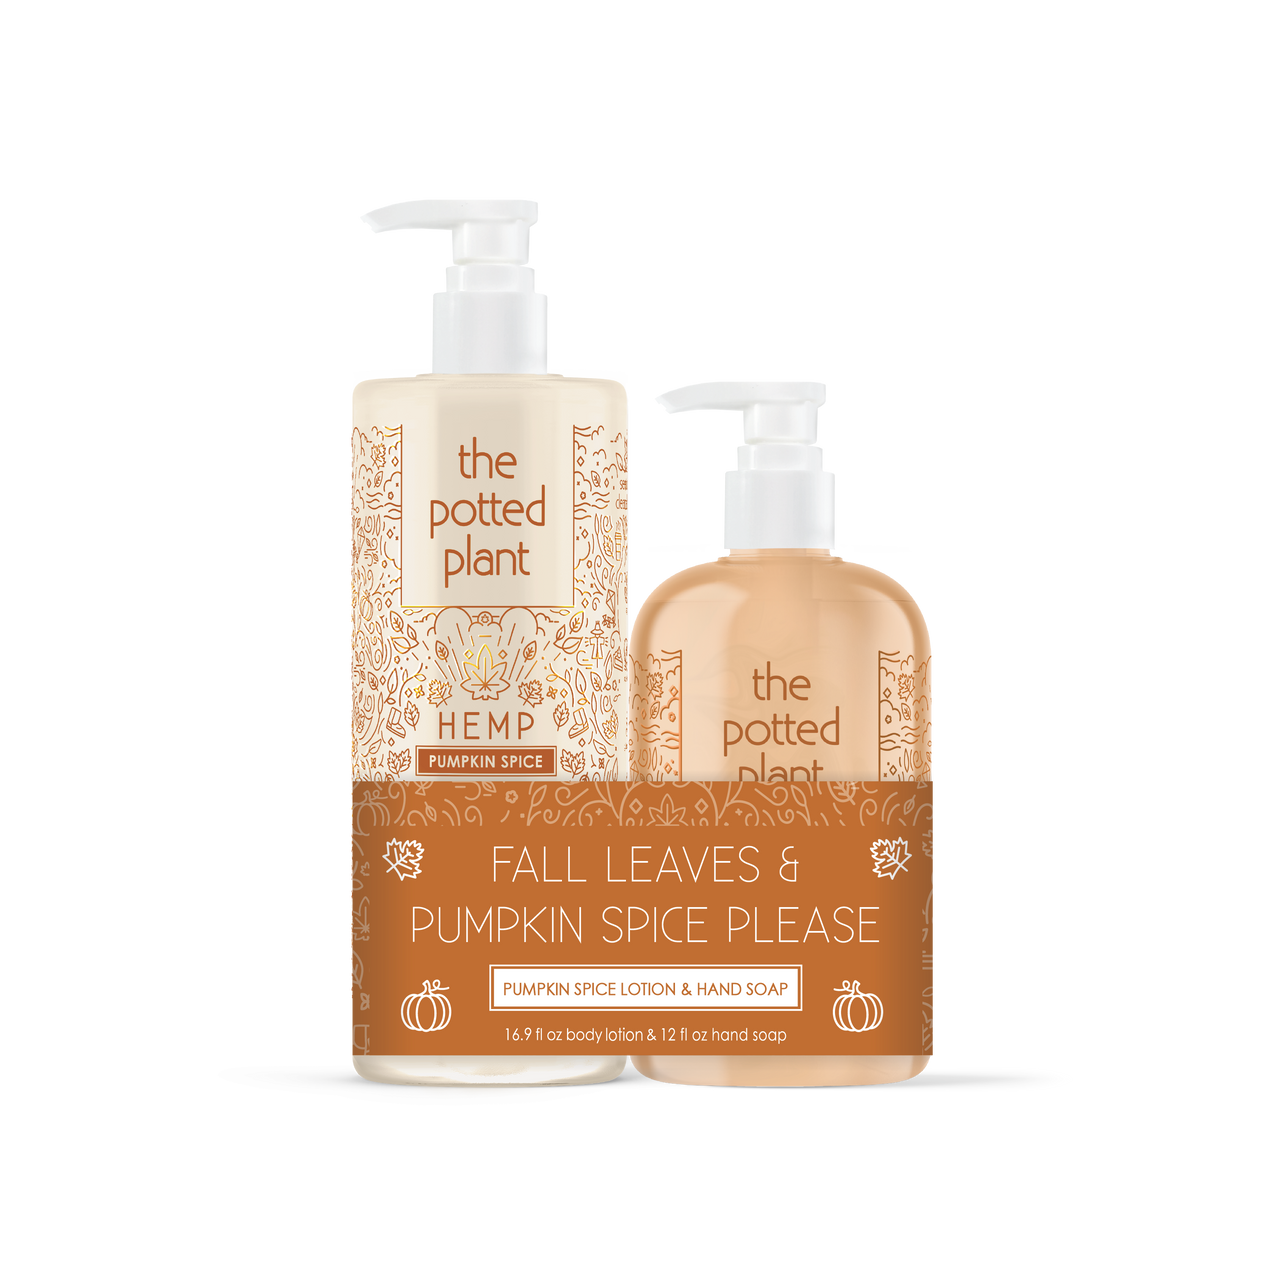 The Potted Plant Pumpkin Spice Lotion and Hand Soap Duo Bundle 16.9 fl oz Lotion & 12 fl oz Hand Soap